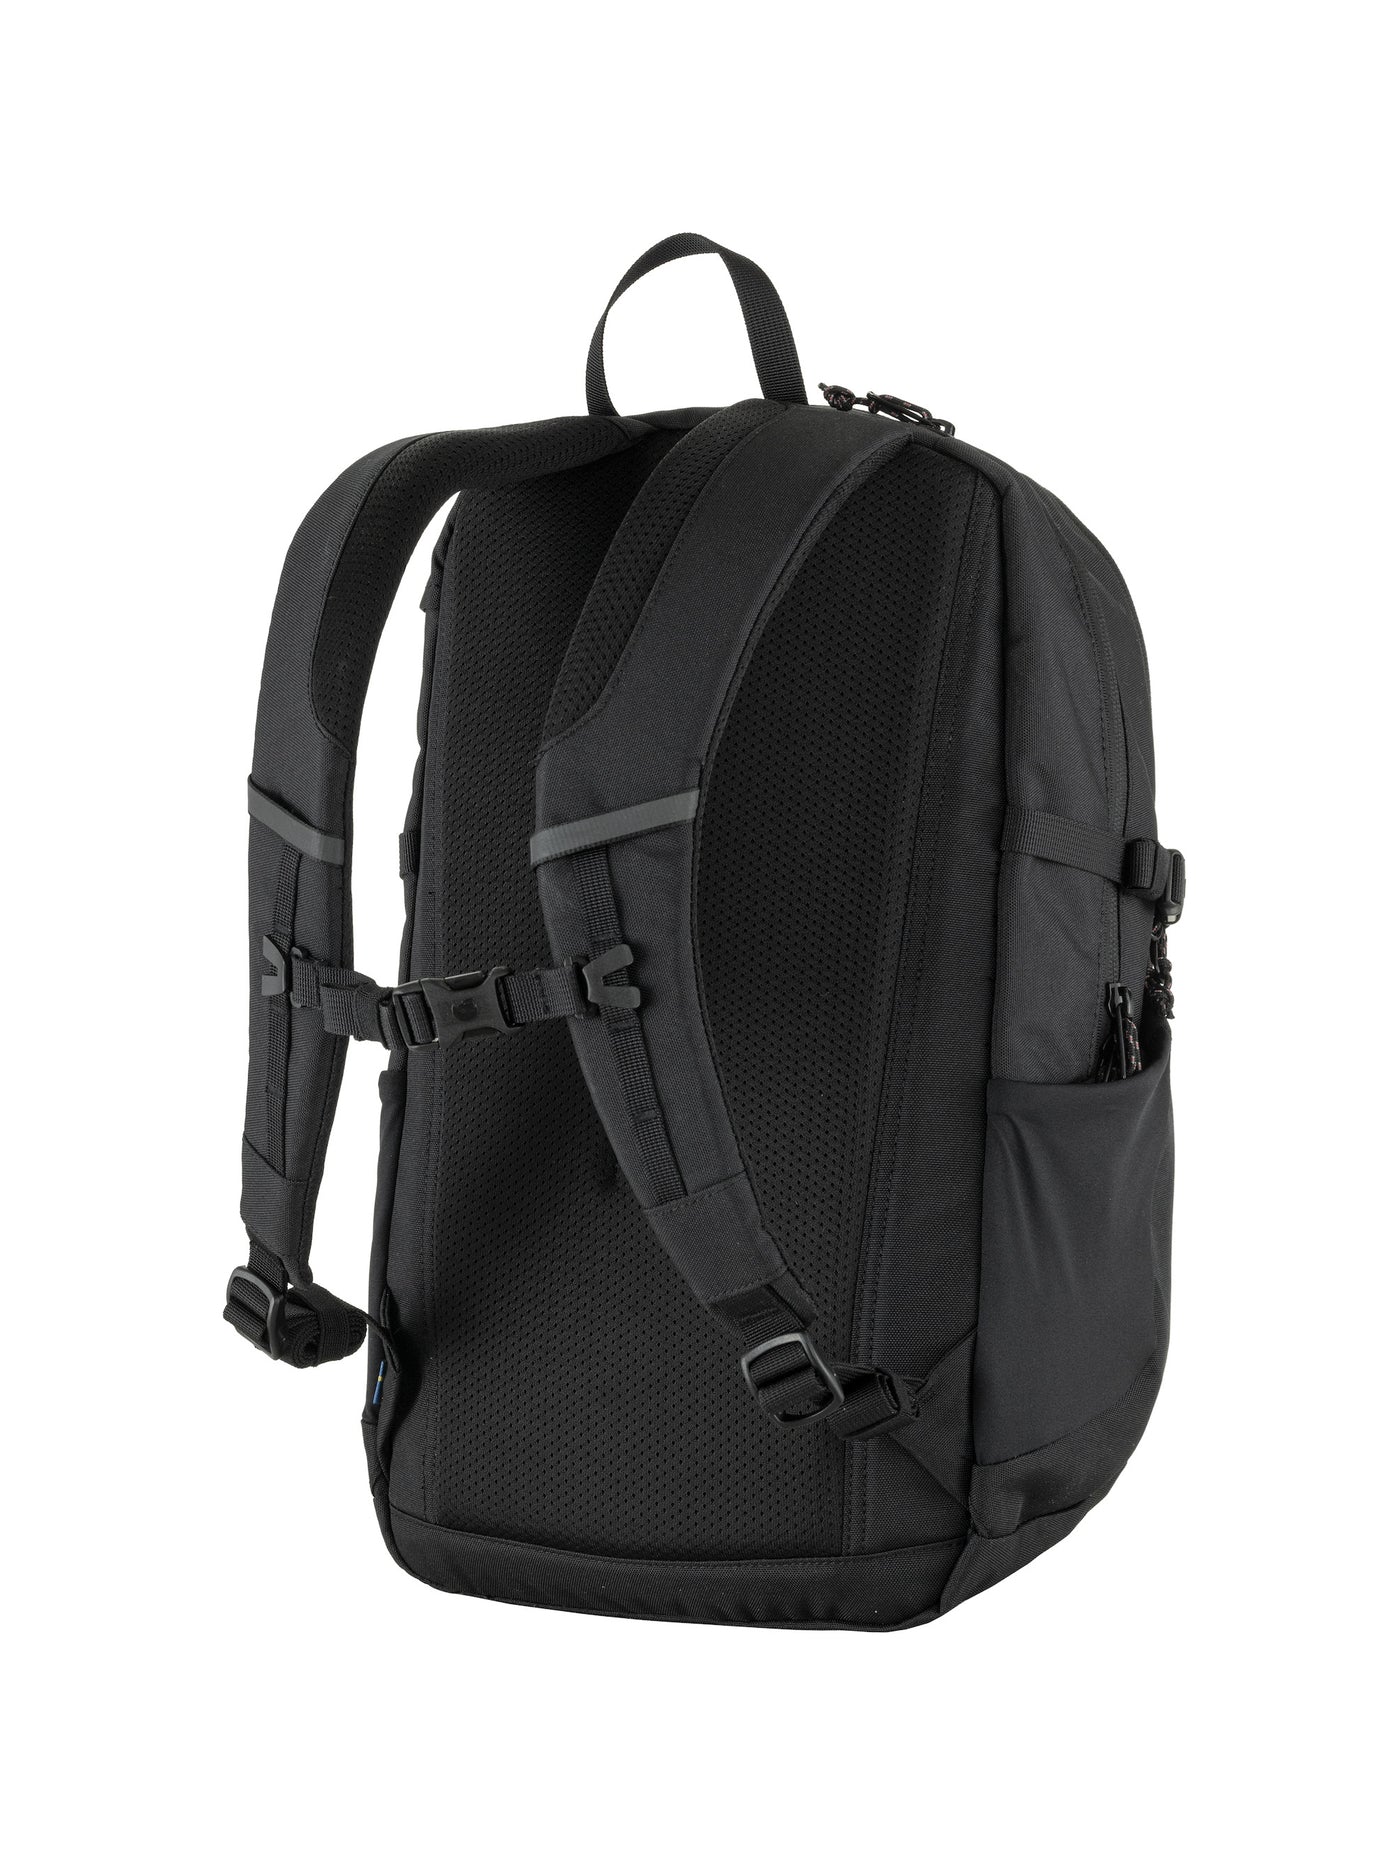 Skule - Backpack for children and teenagers 20 l